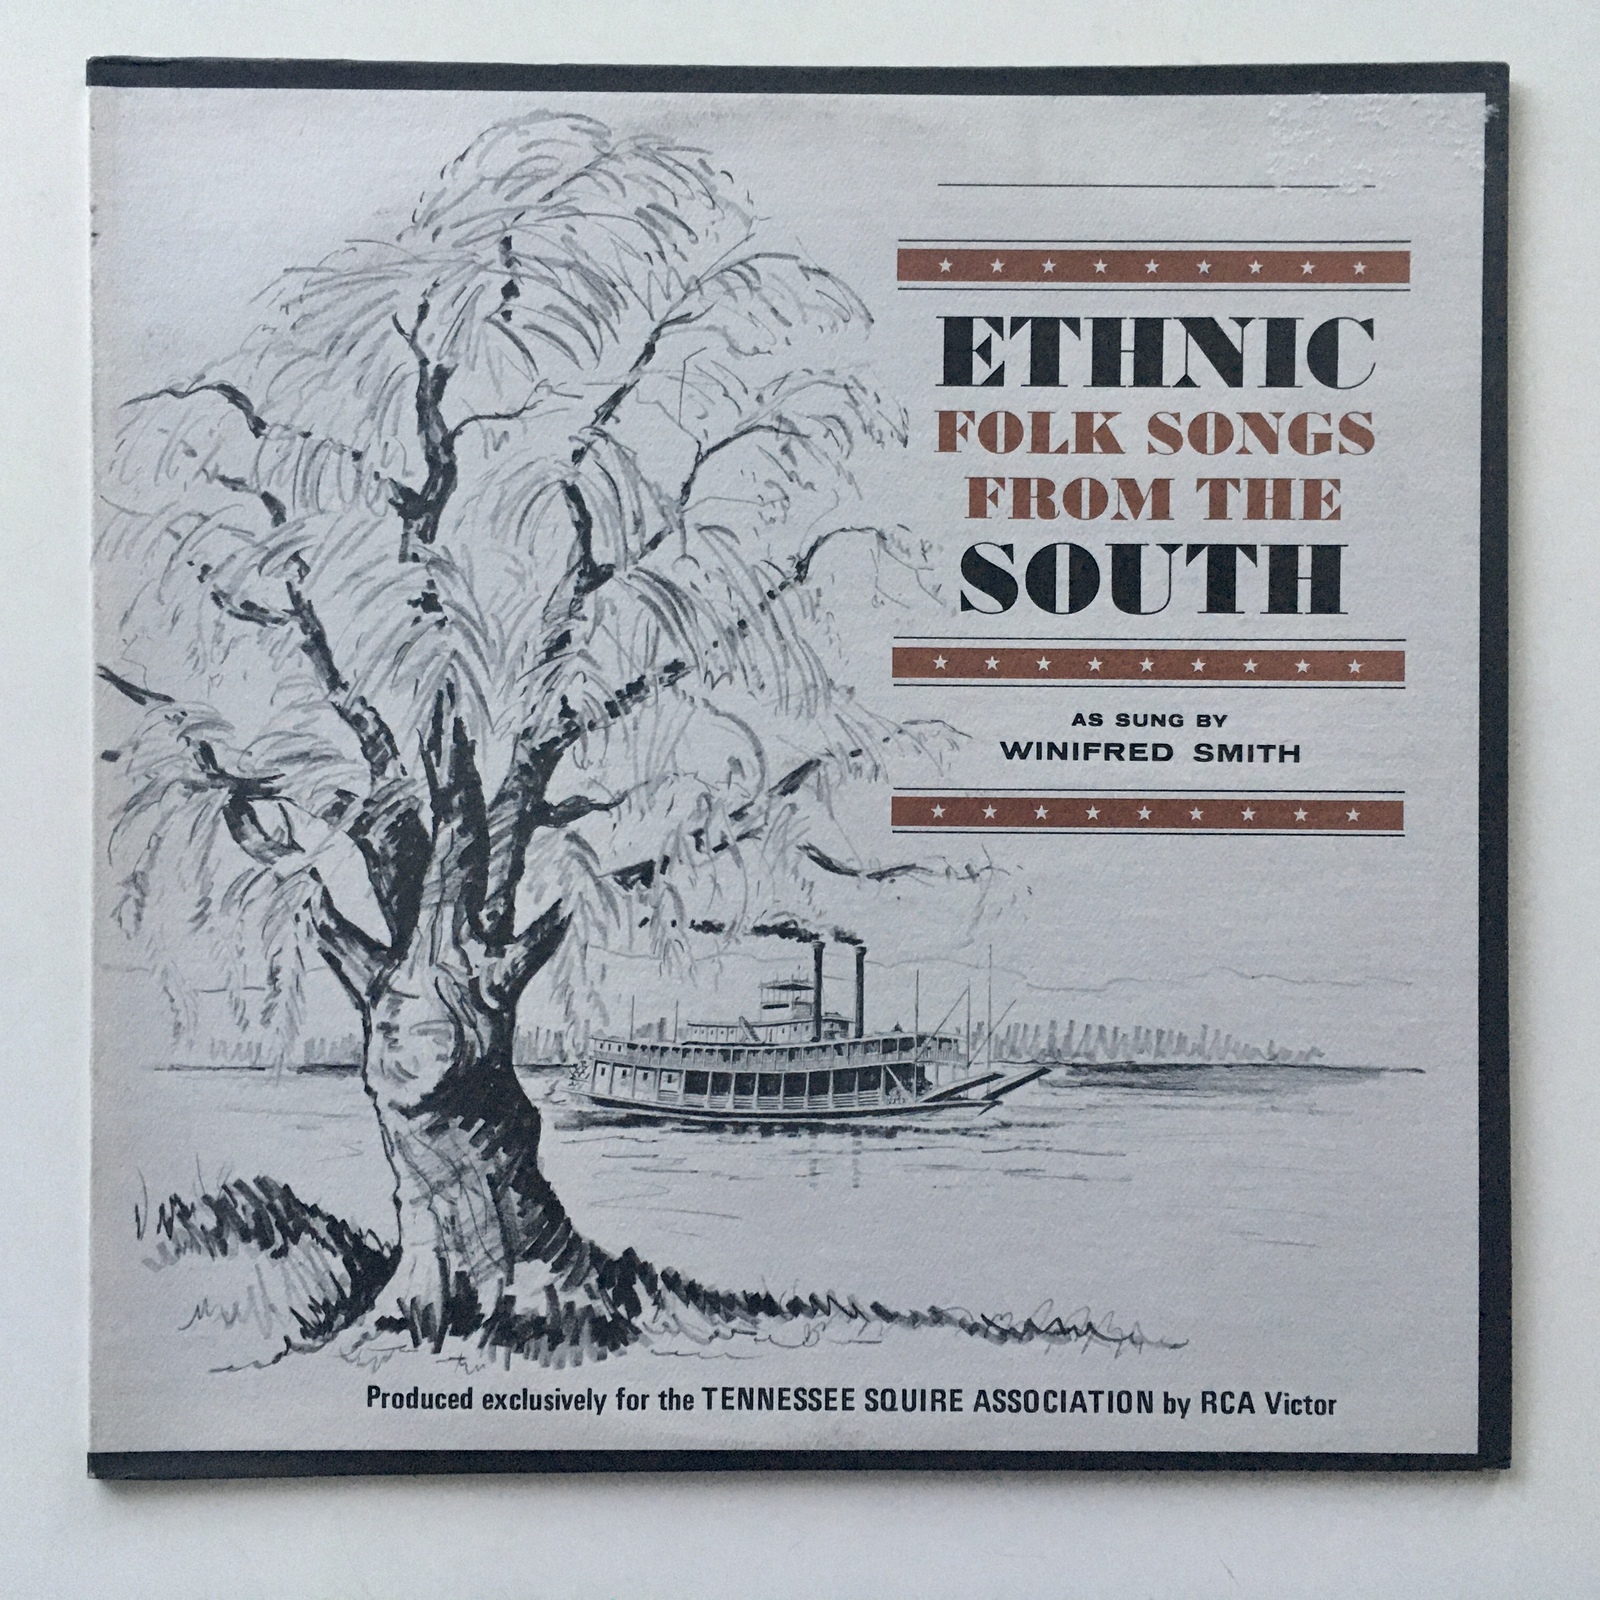 Primary image for Winifred Smith - Ethnic Folk Songs From The South LP Vinyl Record Album